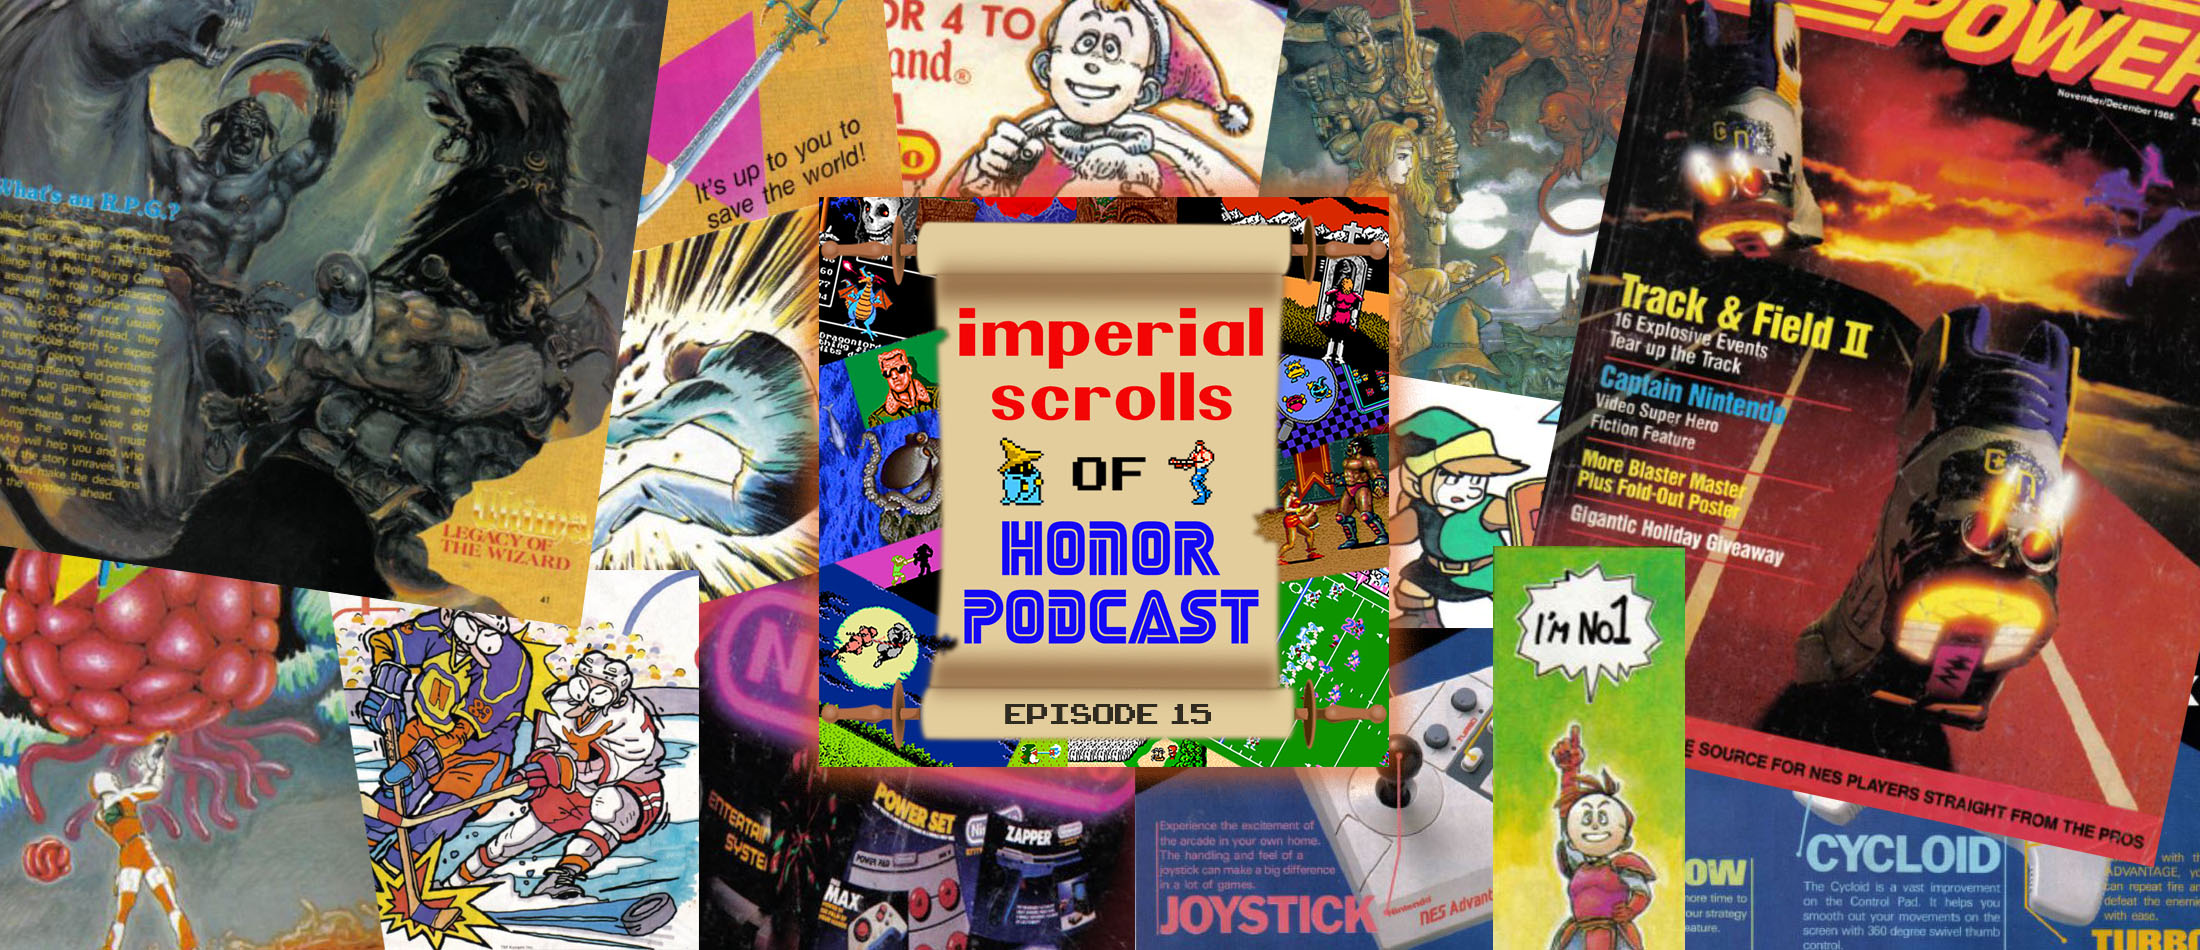 Imperial Scrolls of Honor Podcast - Episode 15 - Nintendo Power Issue #3